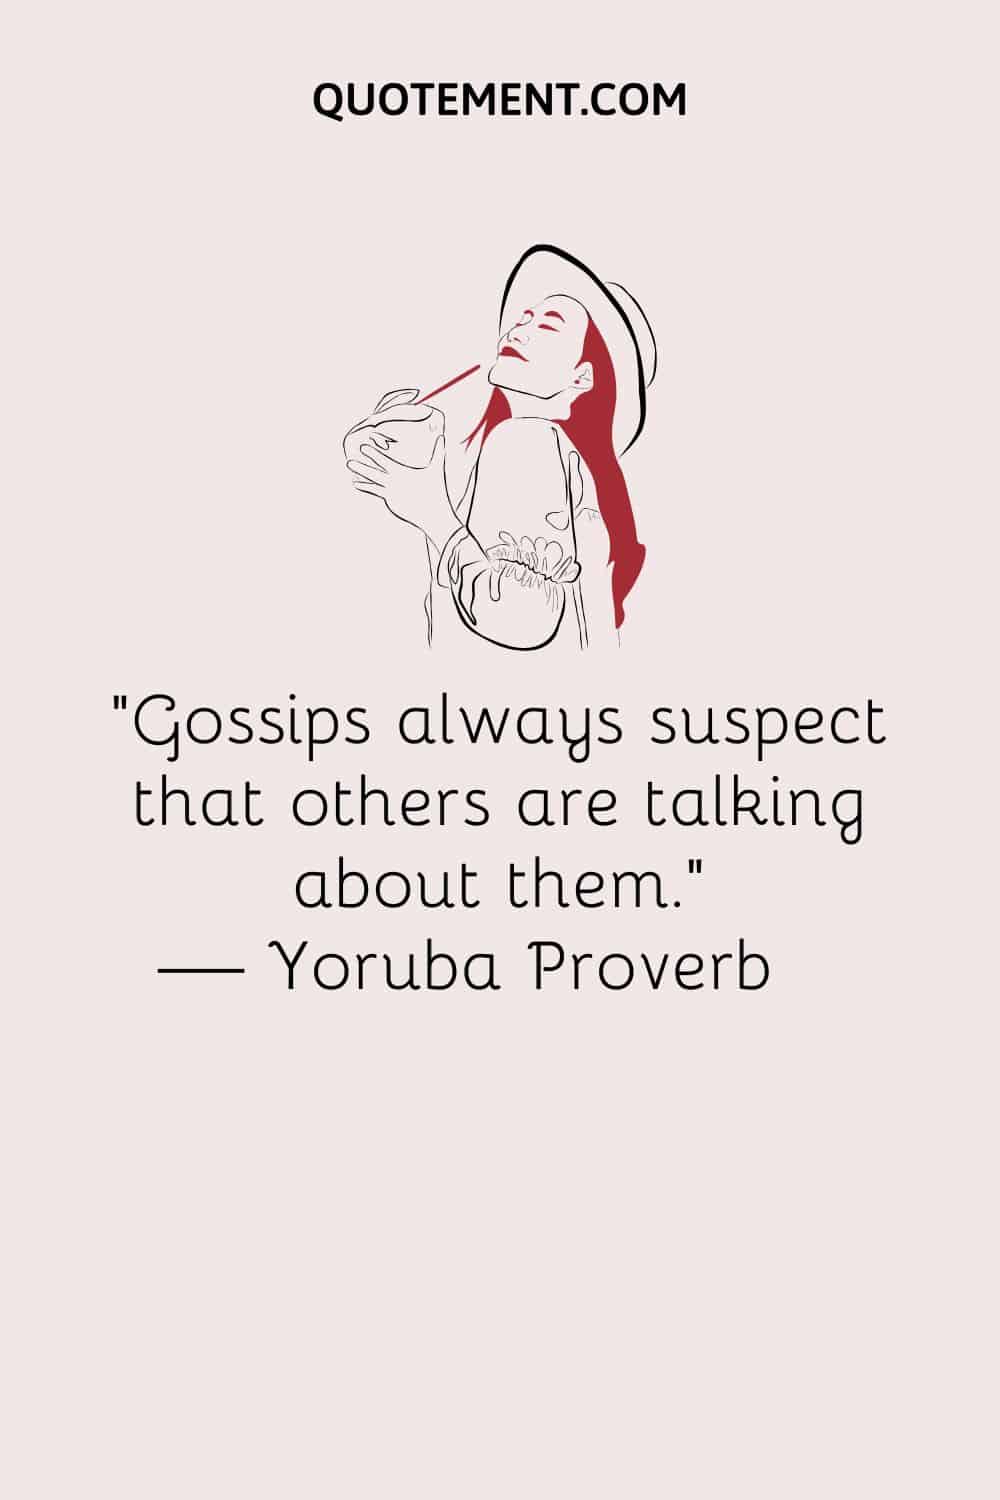 Gossips always suspect that others are talking about them